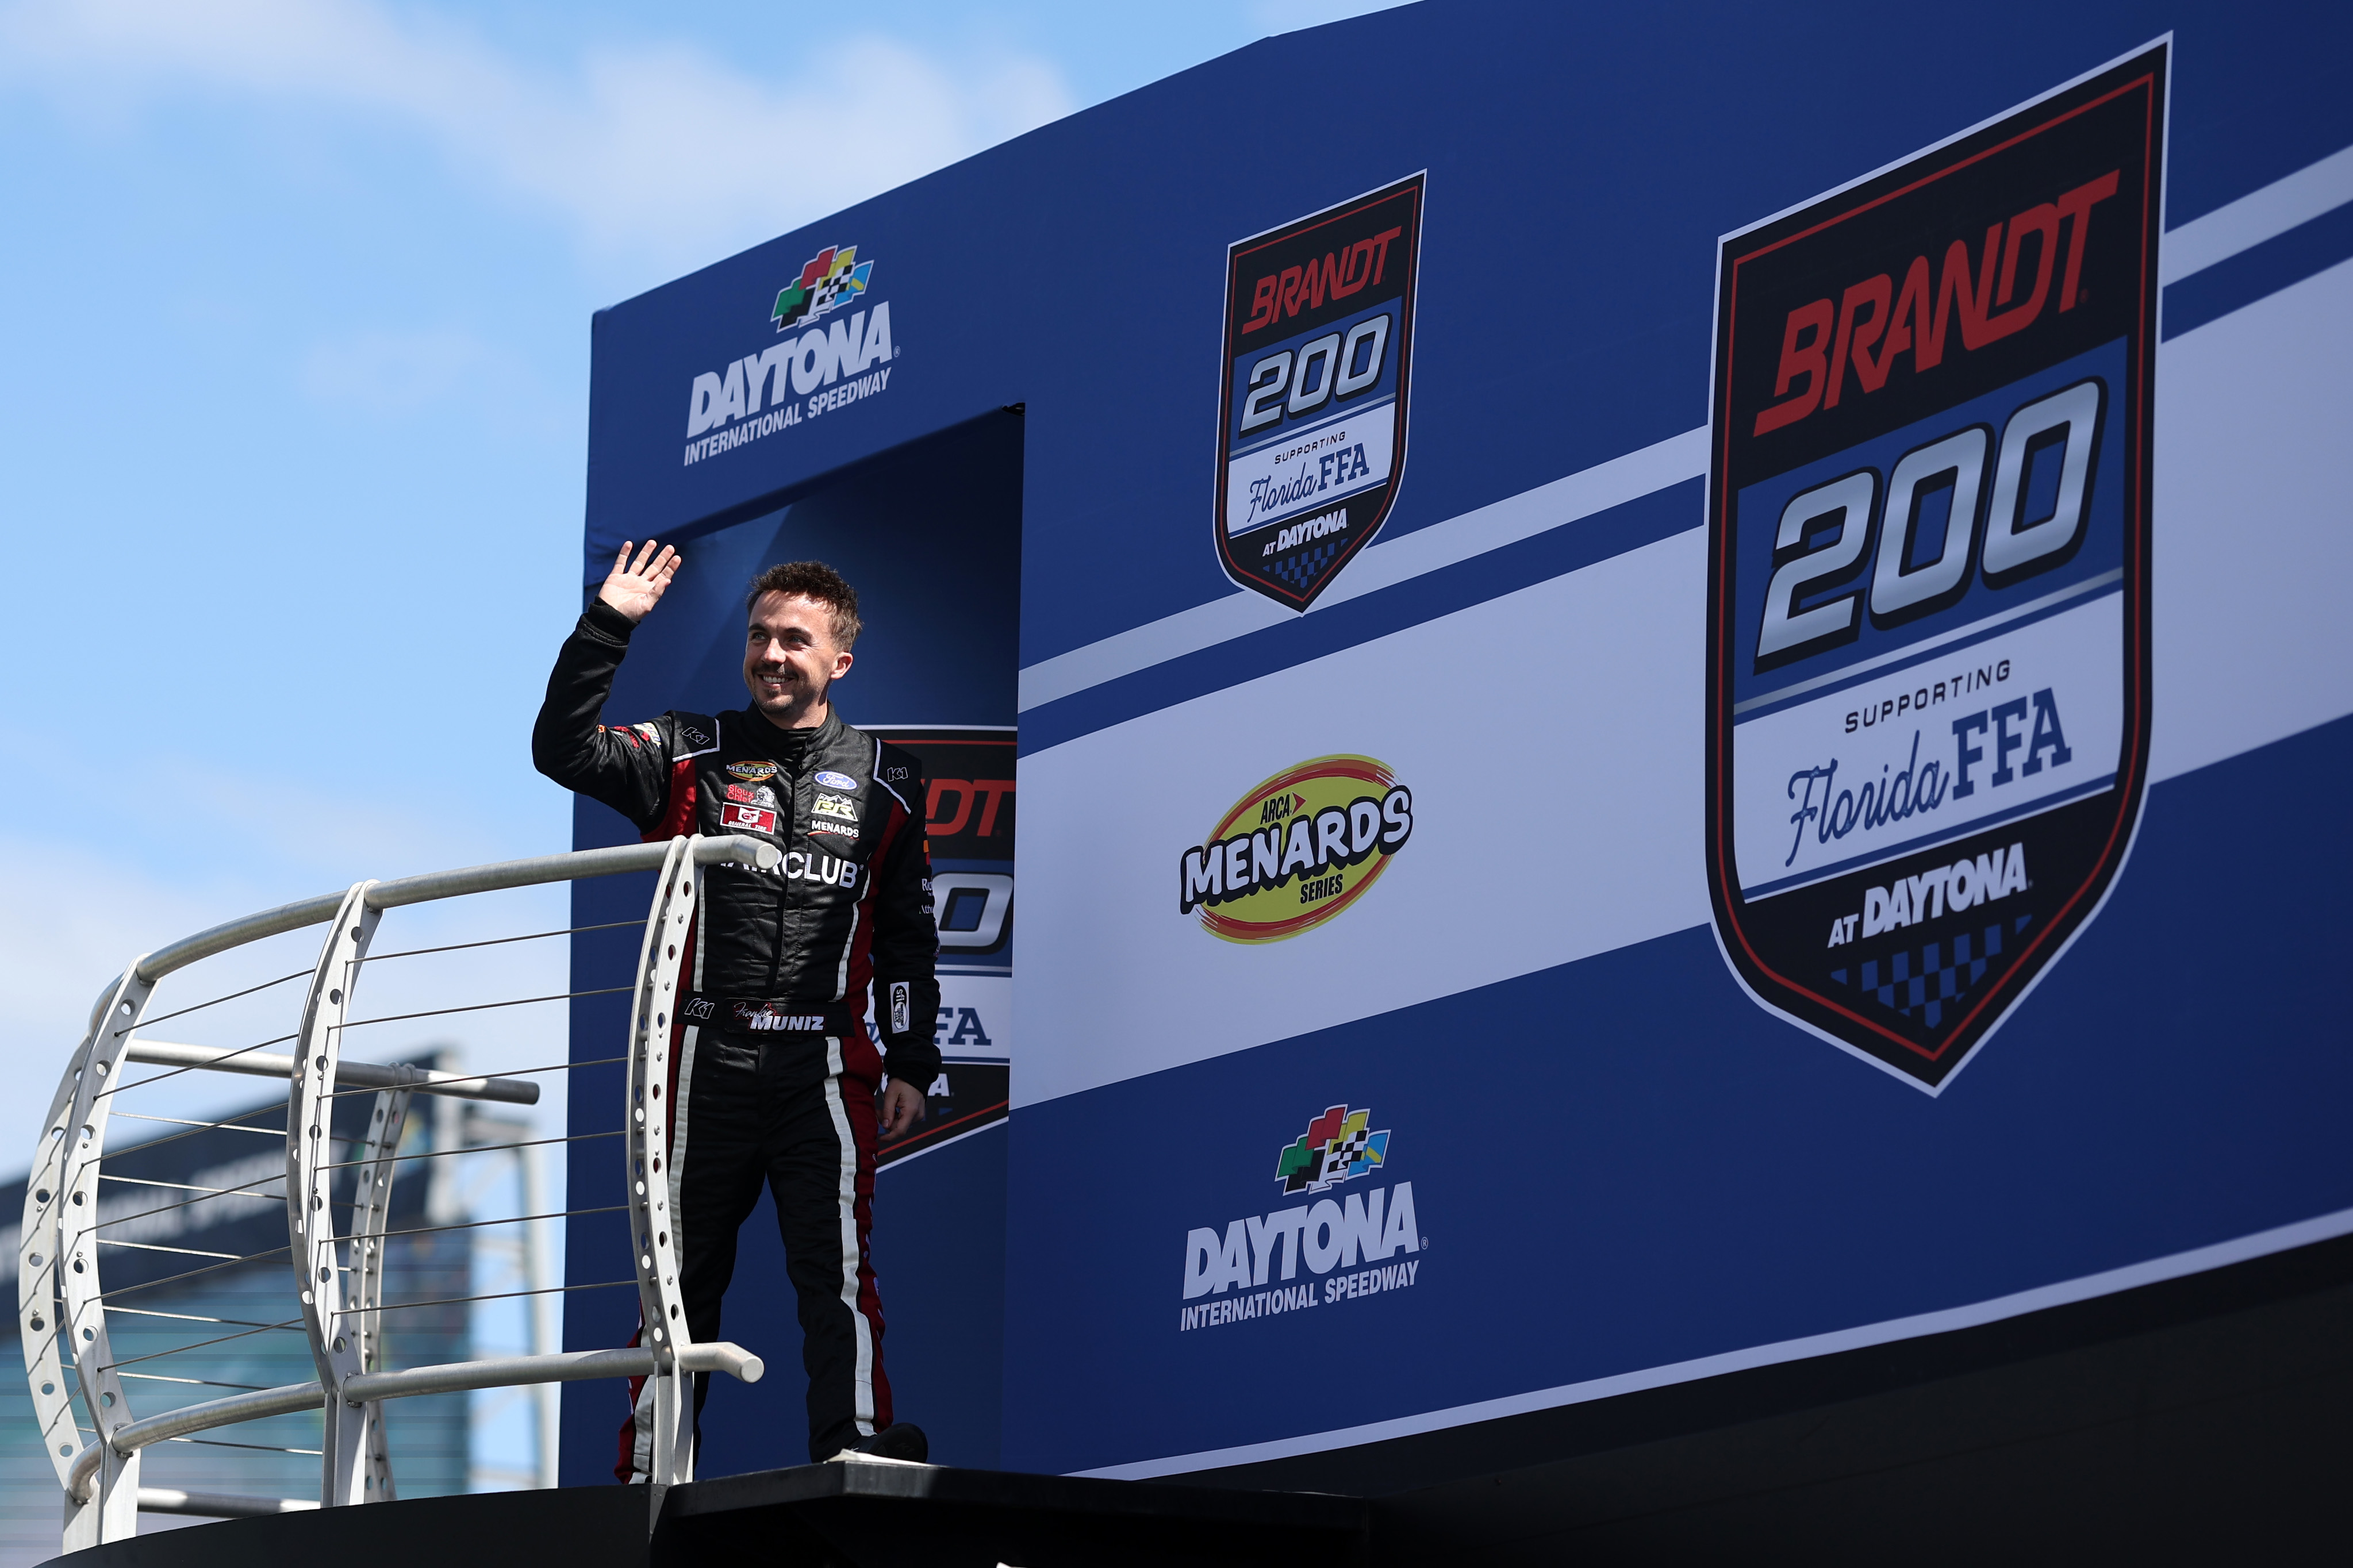 Frankie Muniz during driver intros before the ARCA Menards Series Race on February 18, 2023 in Daytona Beach, Florida | Source: Getty Images